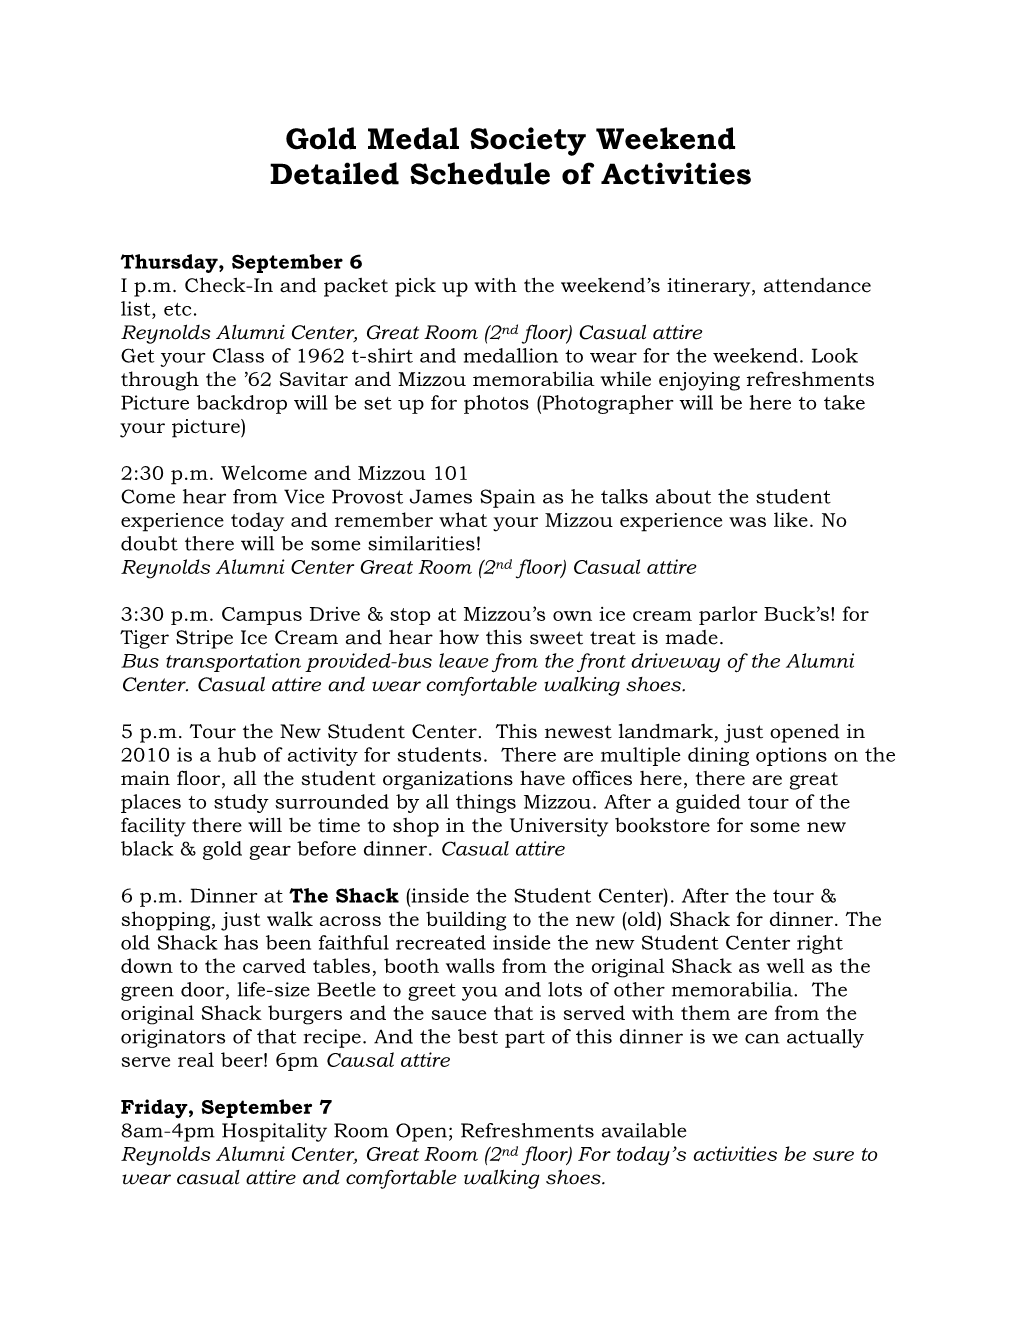 Gold Medal Society Weekend Detailed Schedule of Activities